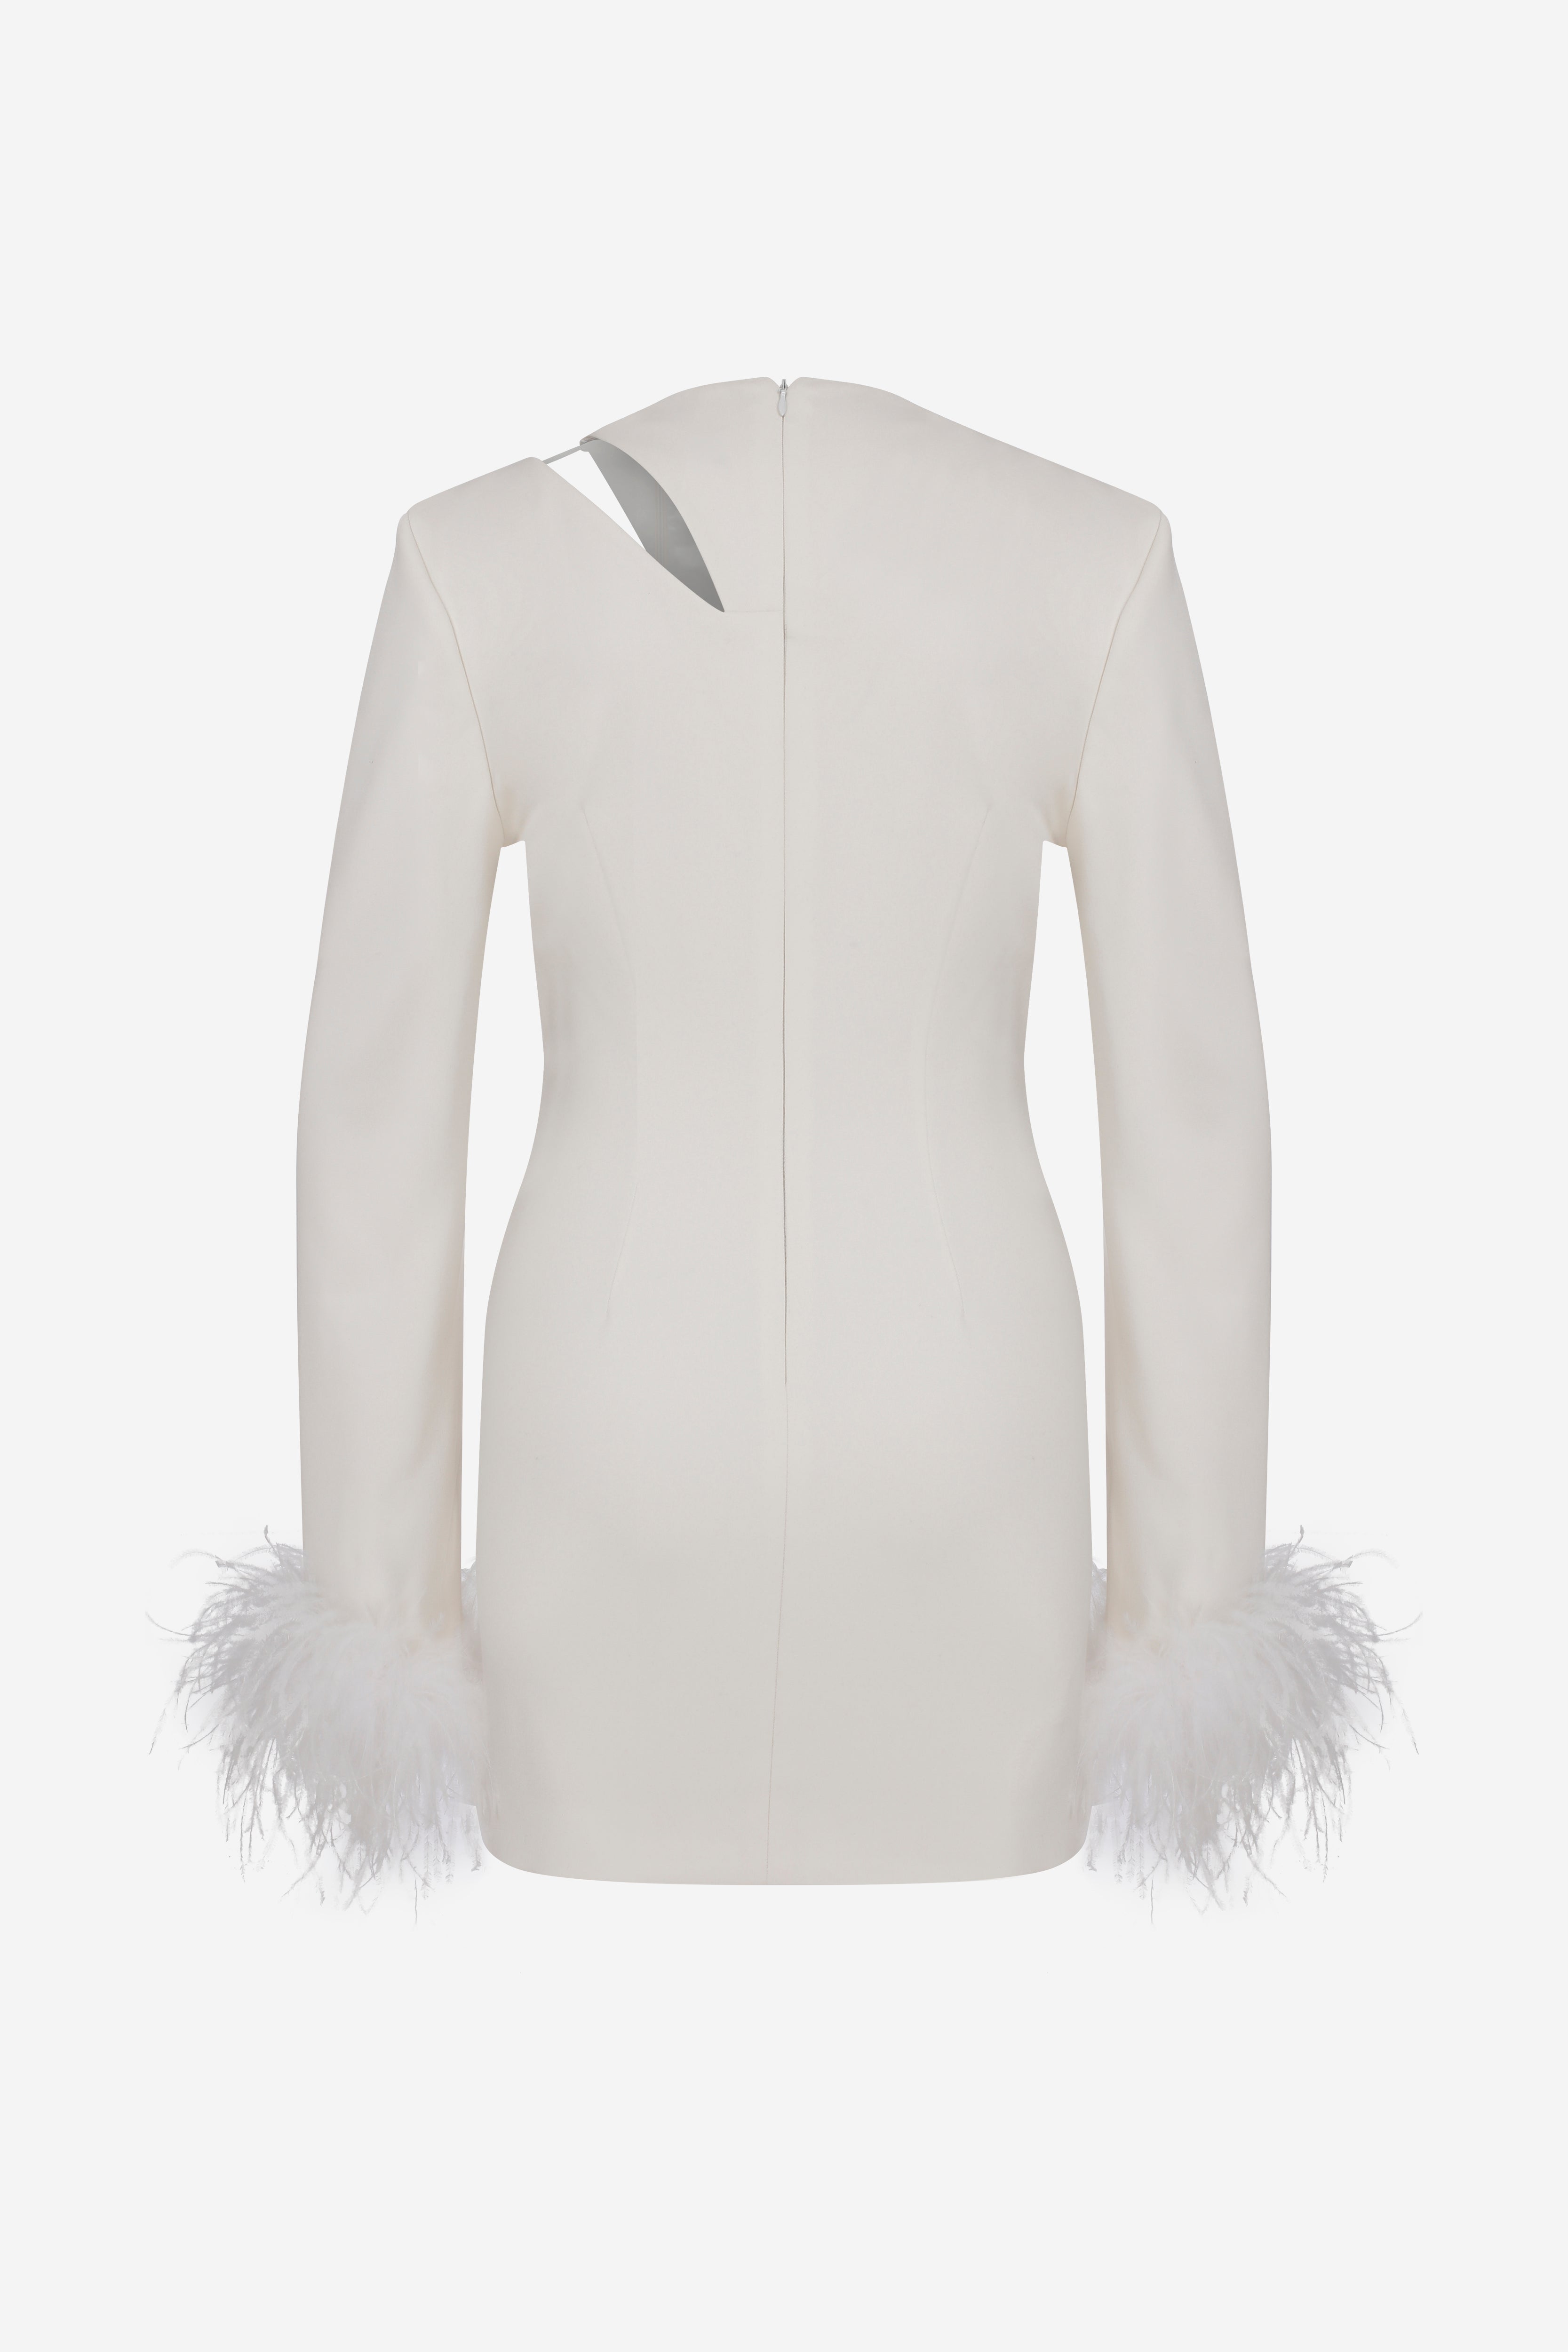 AUDREY - MINI DRESS WITH CUTOUT DETAILS ON SHOULDER AND FEATHER TRIM ON SLEEVES IN WHITE